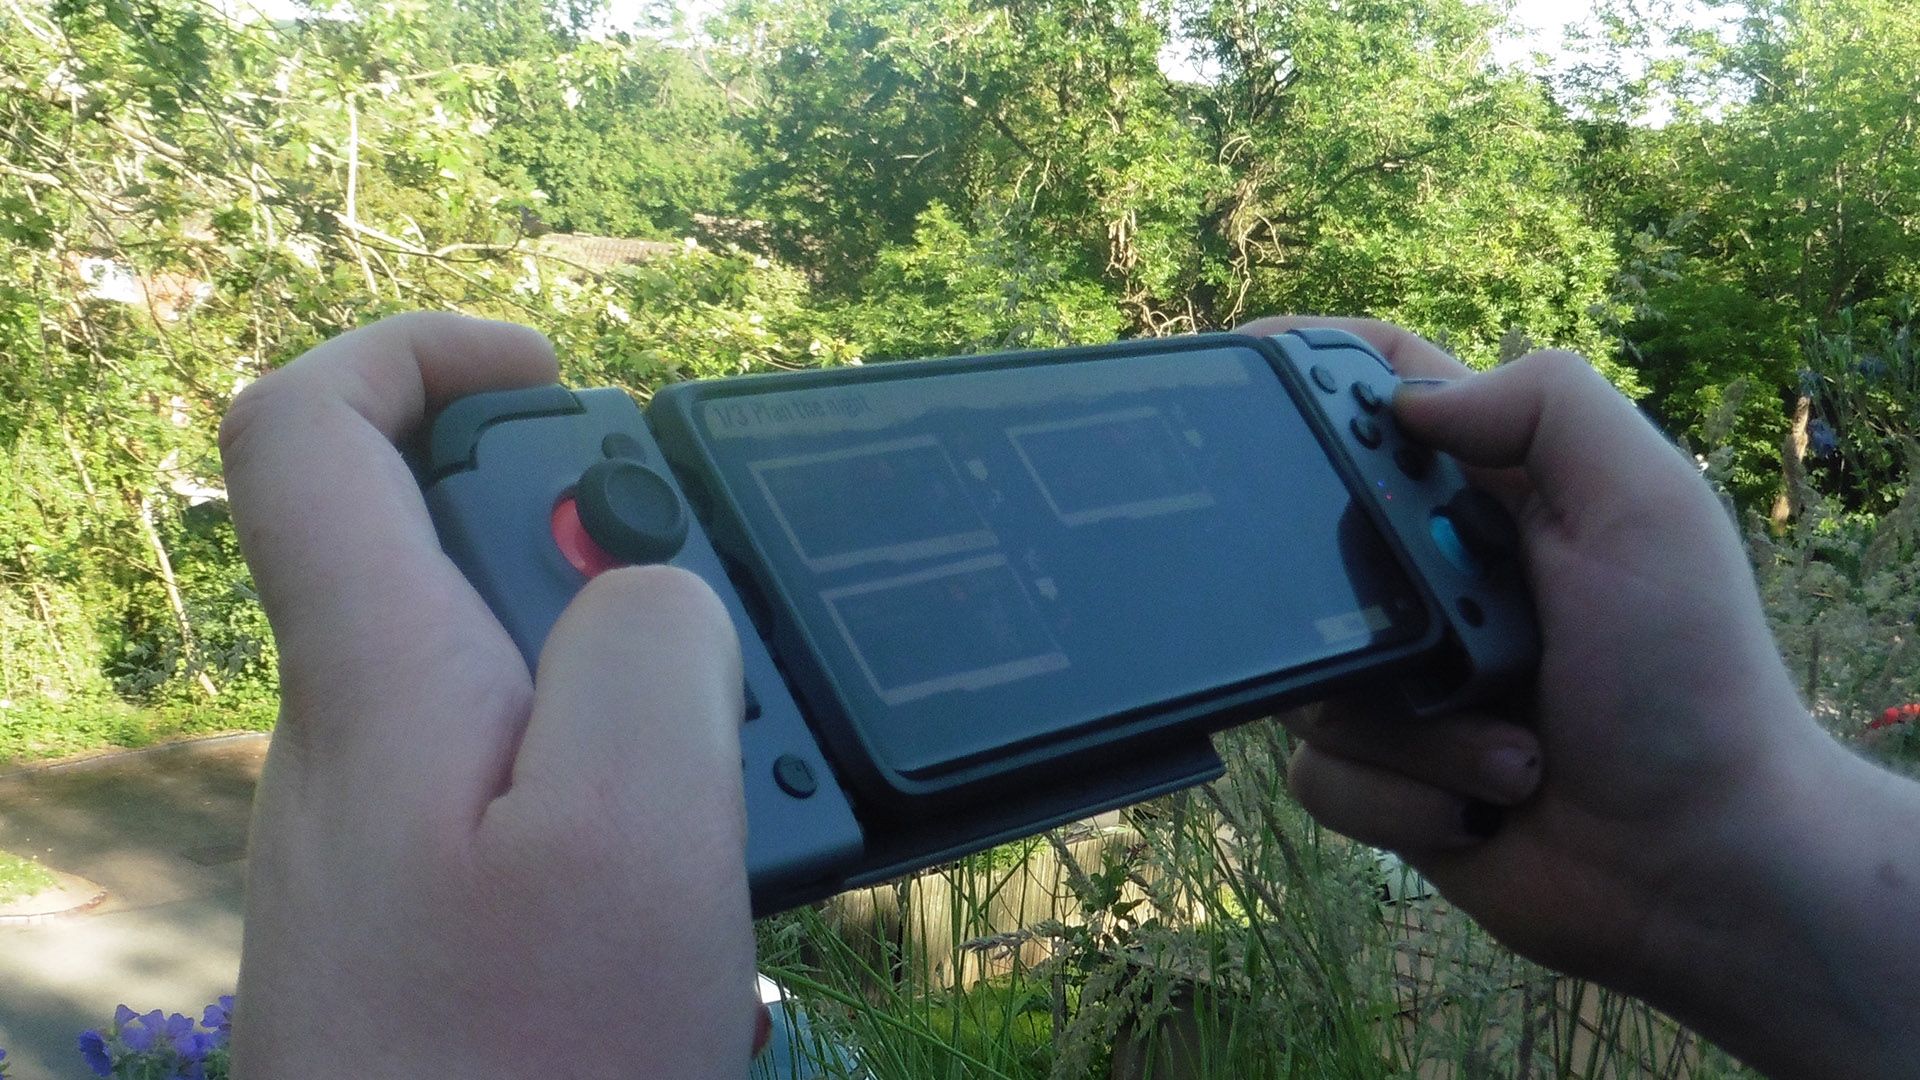 GameSir X2 Bluetooth Controller Being Played Over Sunny Background